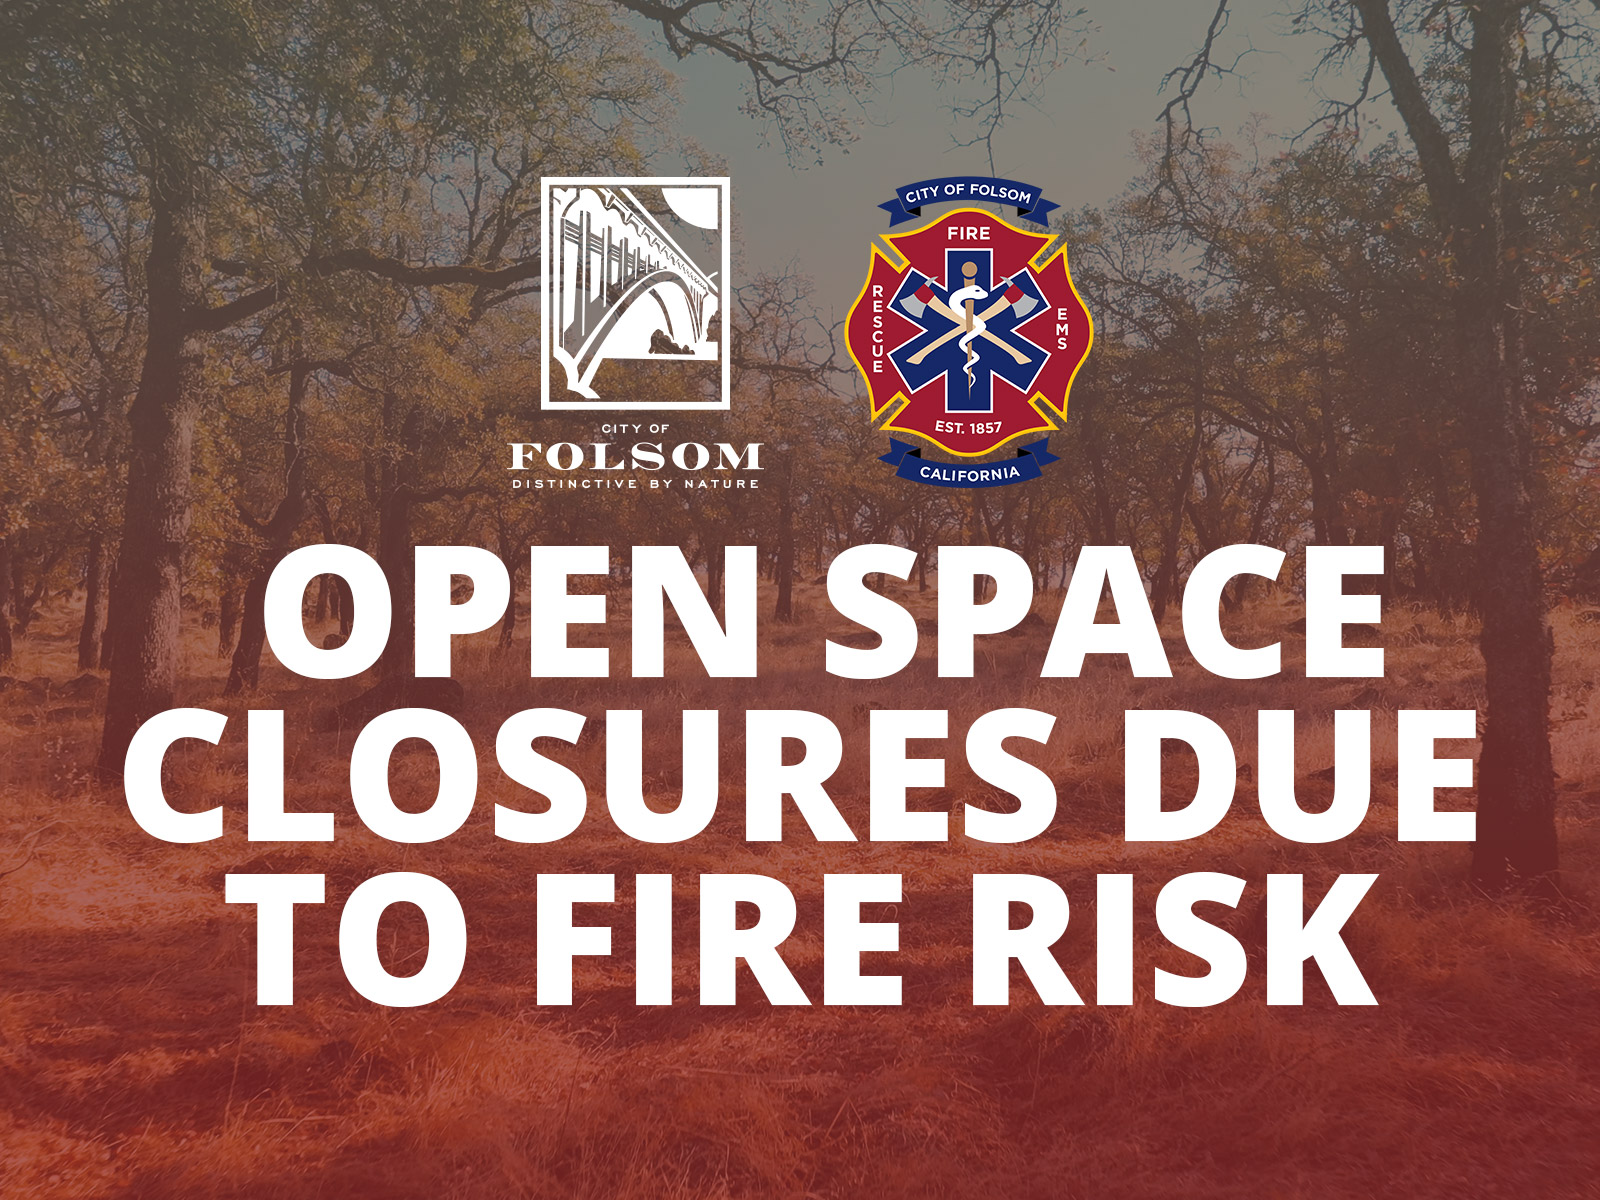 Fire Emergency Open Space closure due to fire risk warning with trees in the background and a red gradient overlay with the COF and FD logo on the left